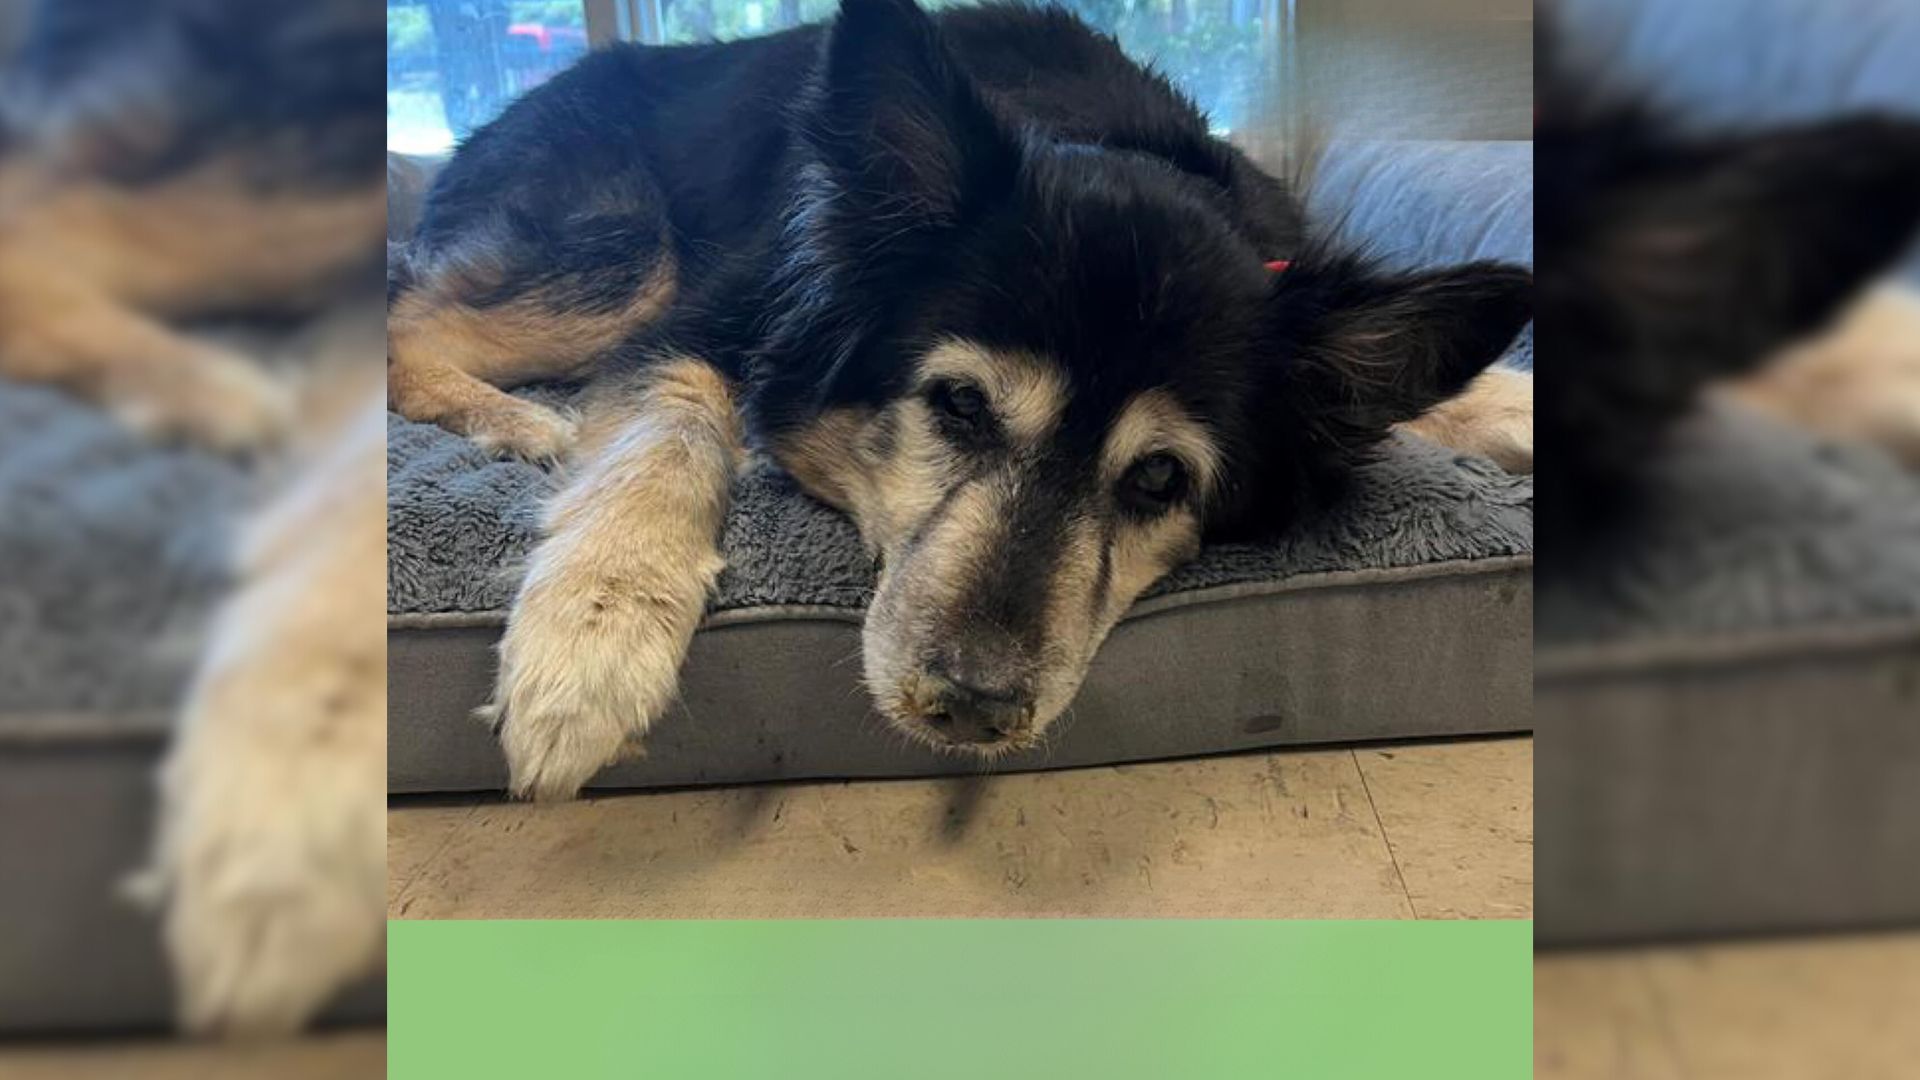 Senior Dog Left At Shelter For ‘Being Boring’, But The Reason Was Far More Serious